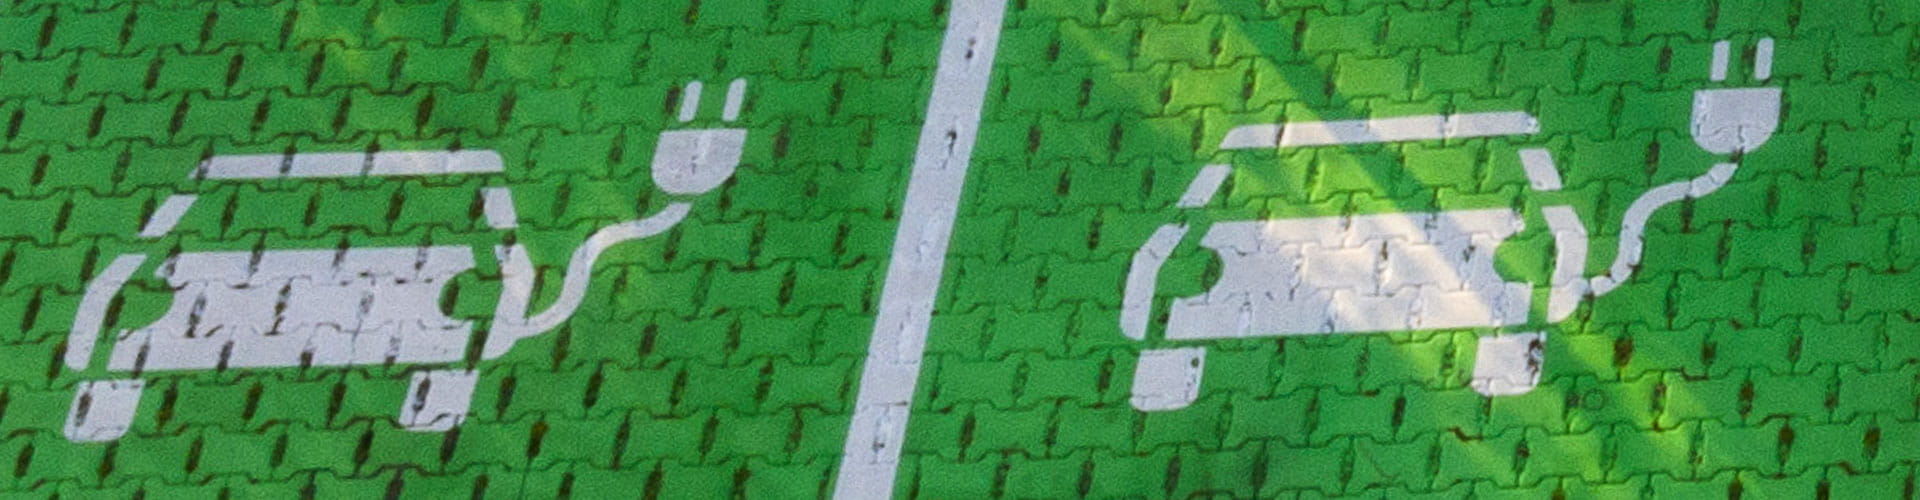 Painted symbol of a white electric vehicle on pavement.